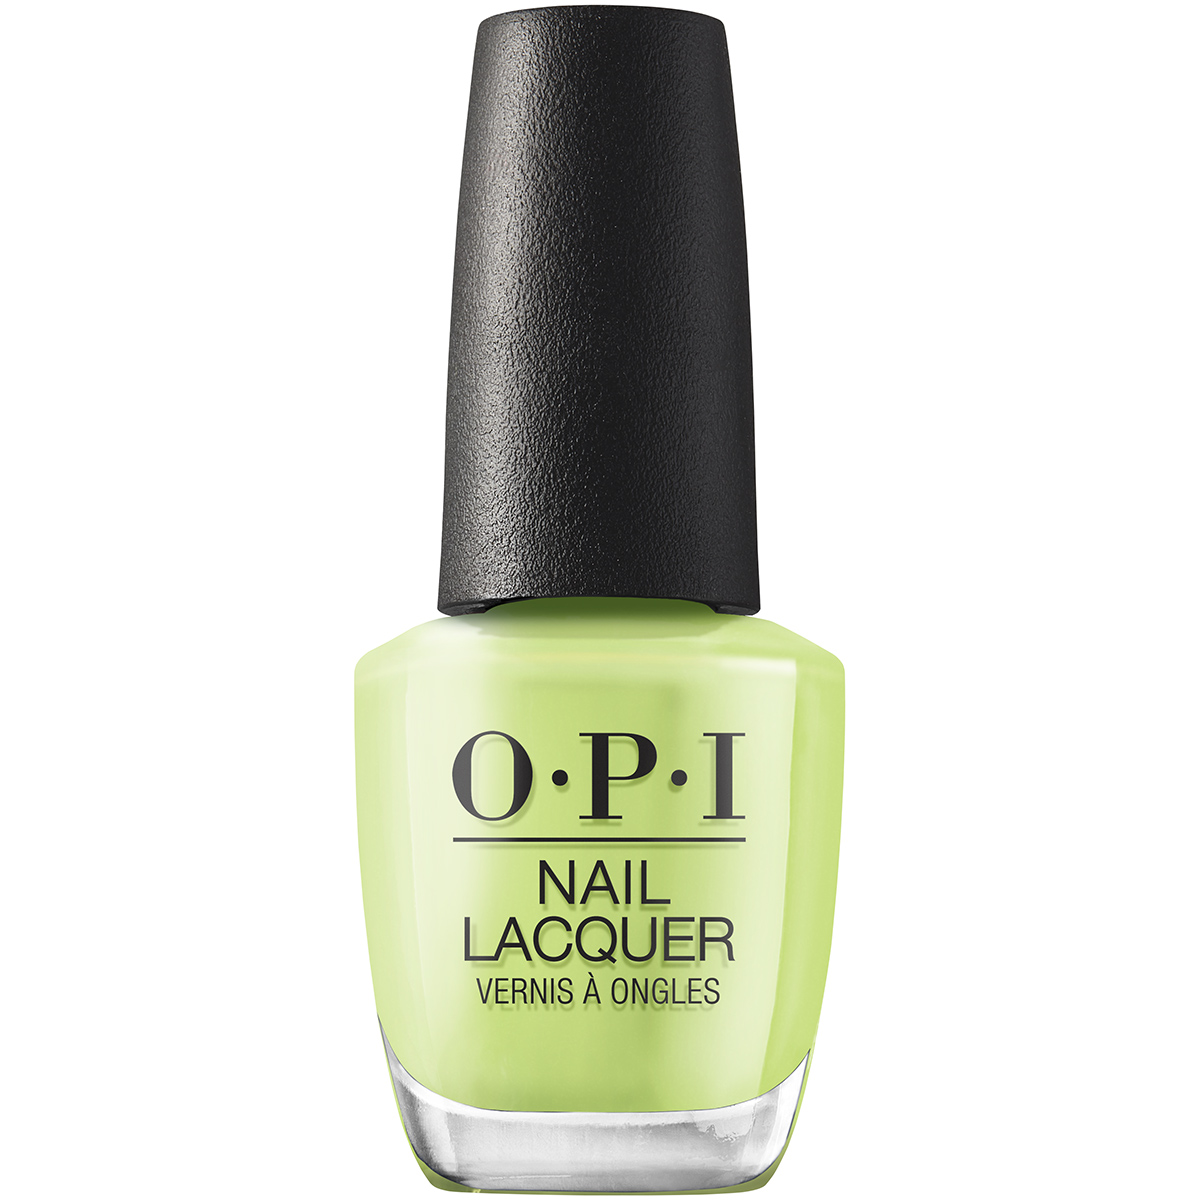 Lac de unghii Nail Lacquer Summer, Summer MondayFriday, 15 ml, Opi